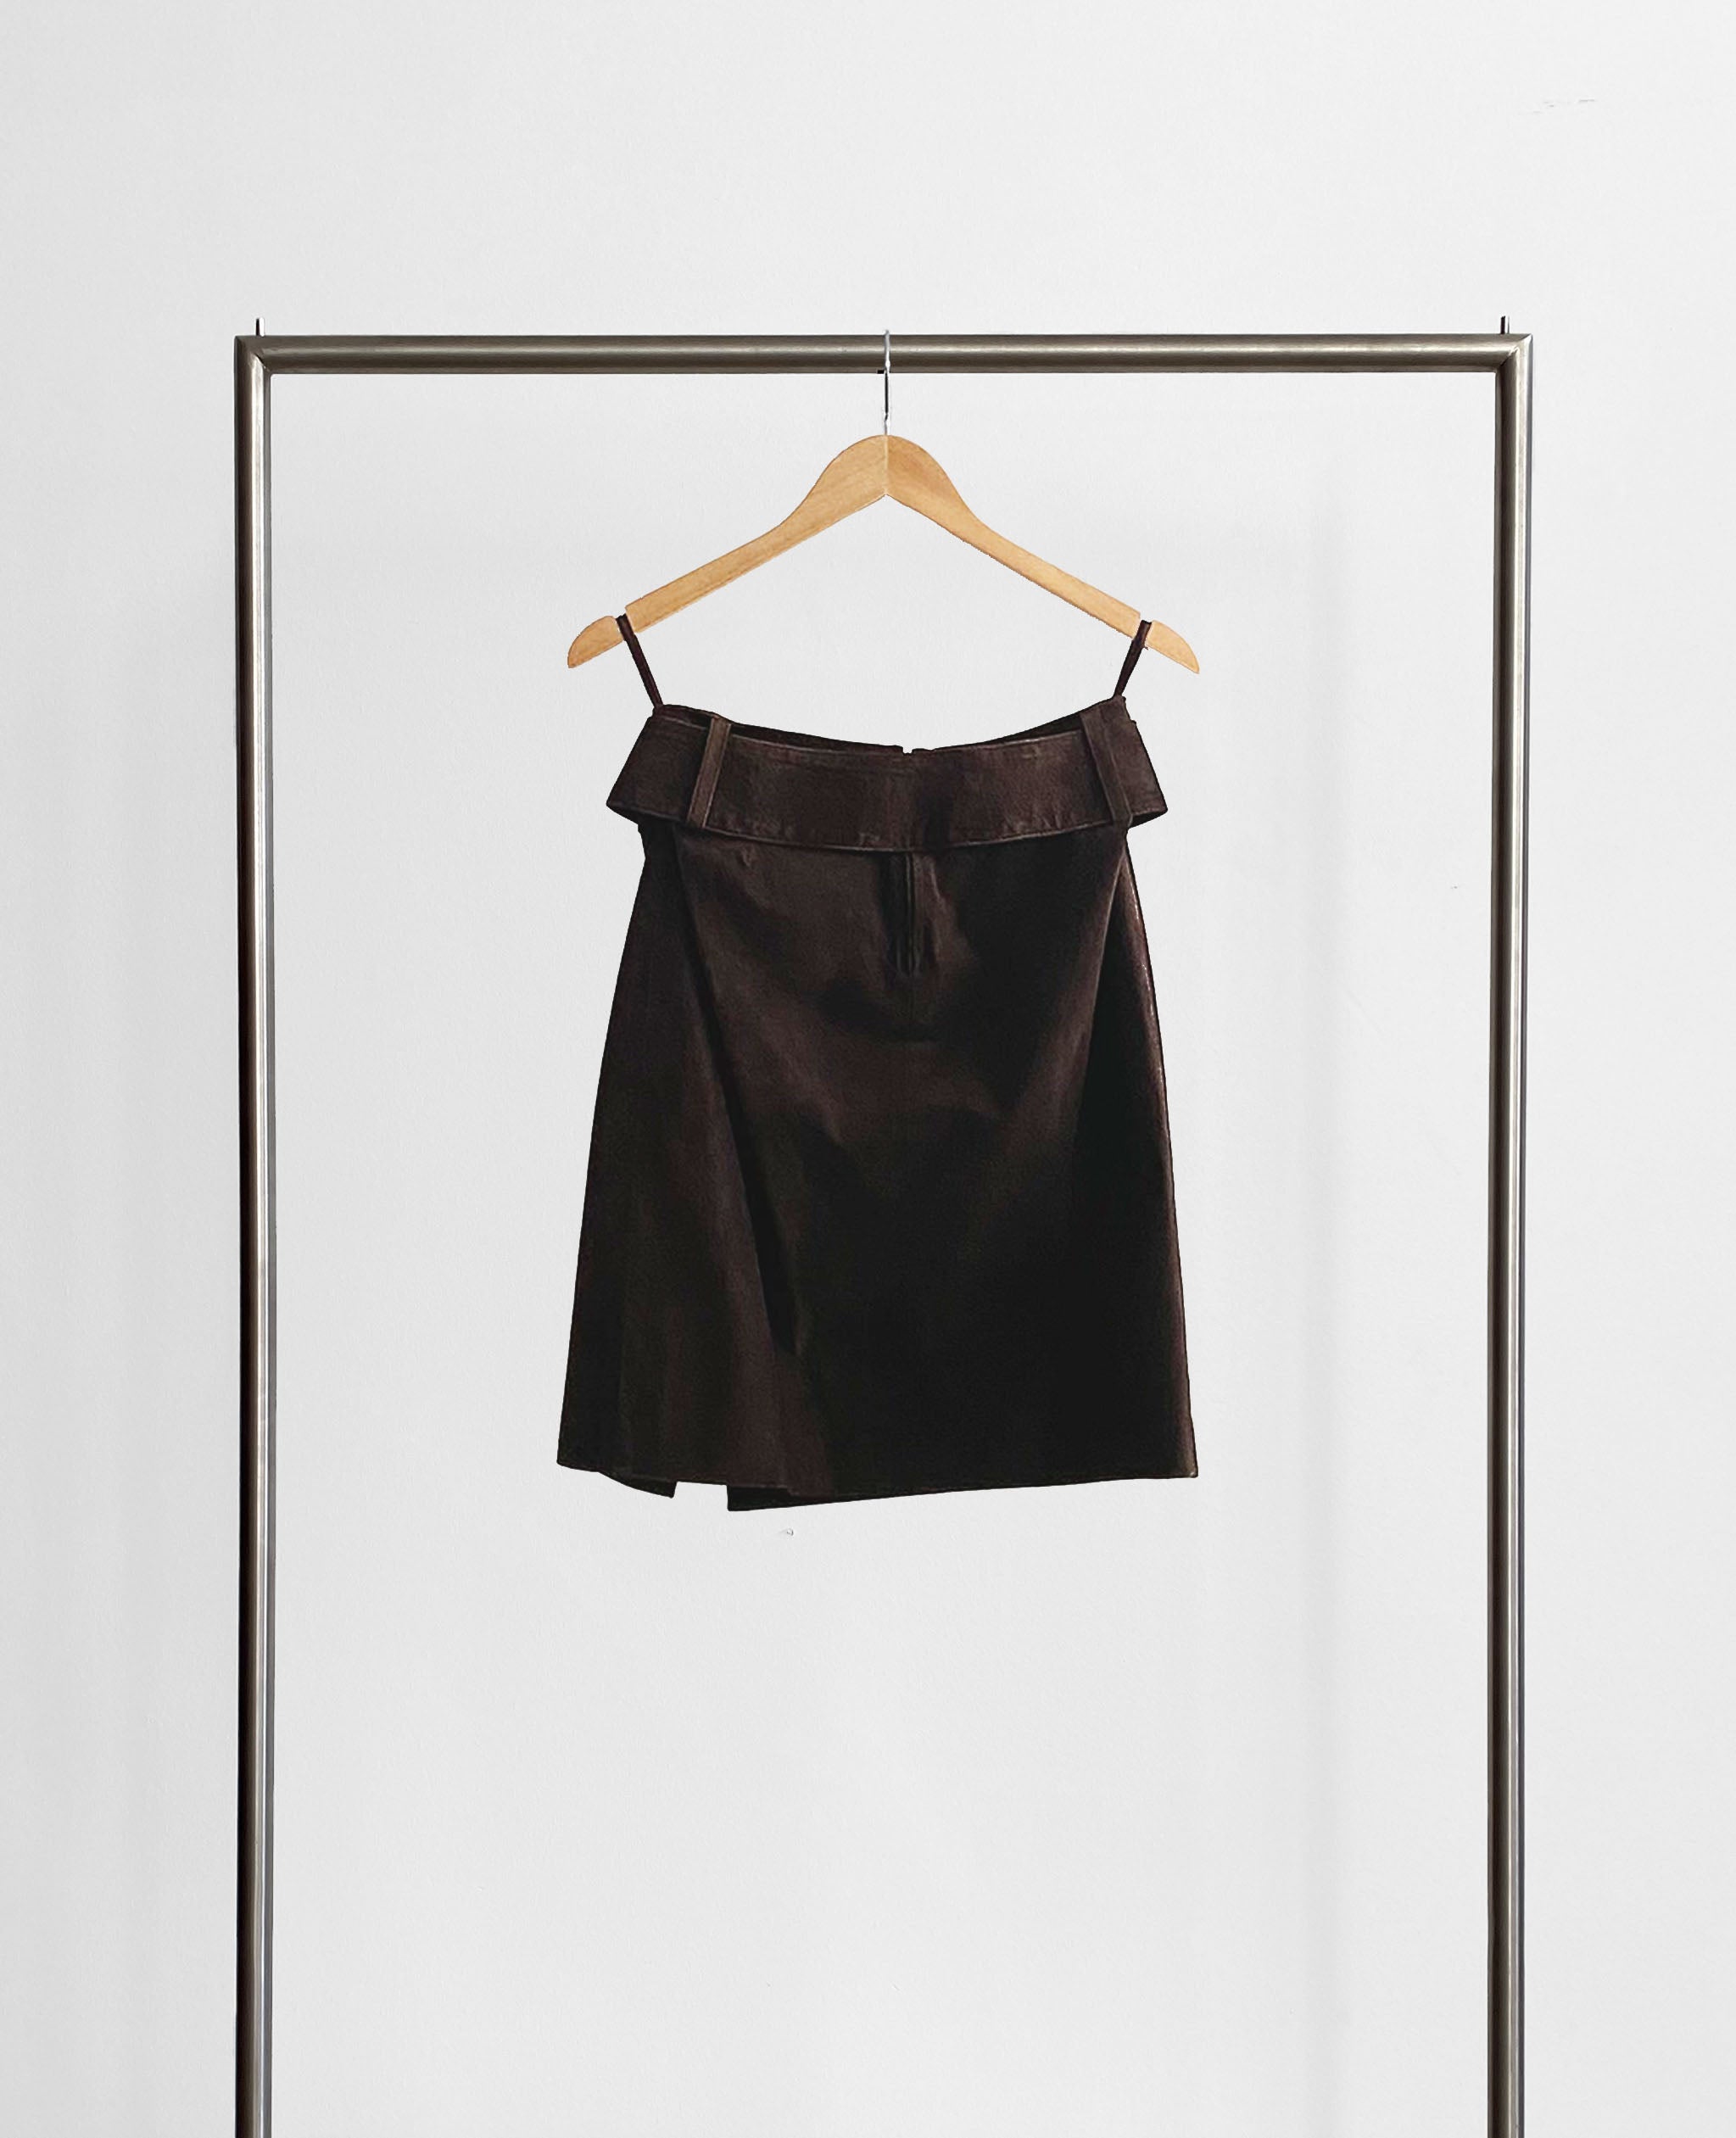 Chocolate Brown Suede Skirt